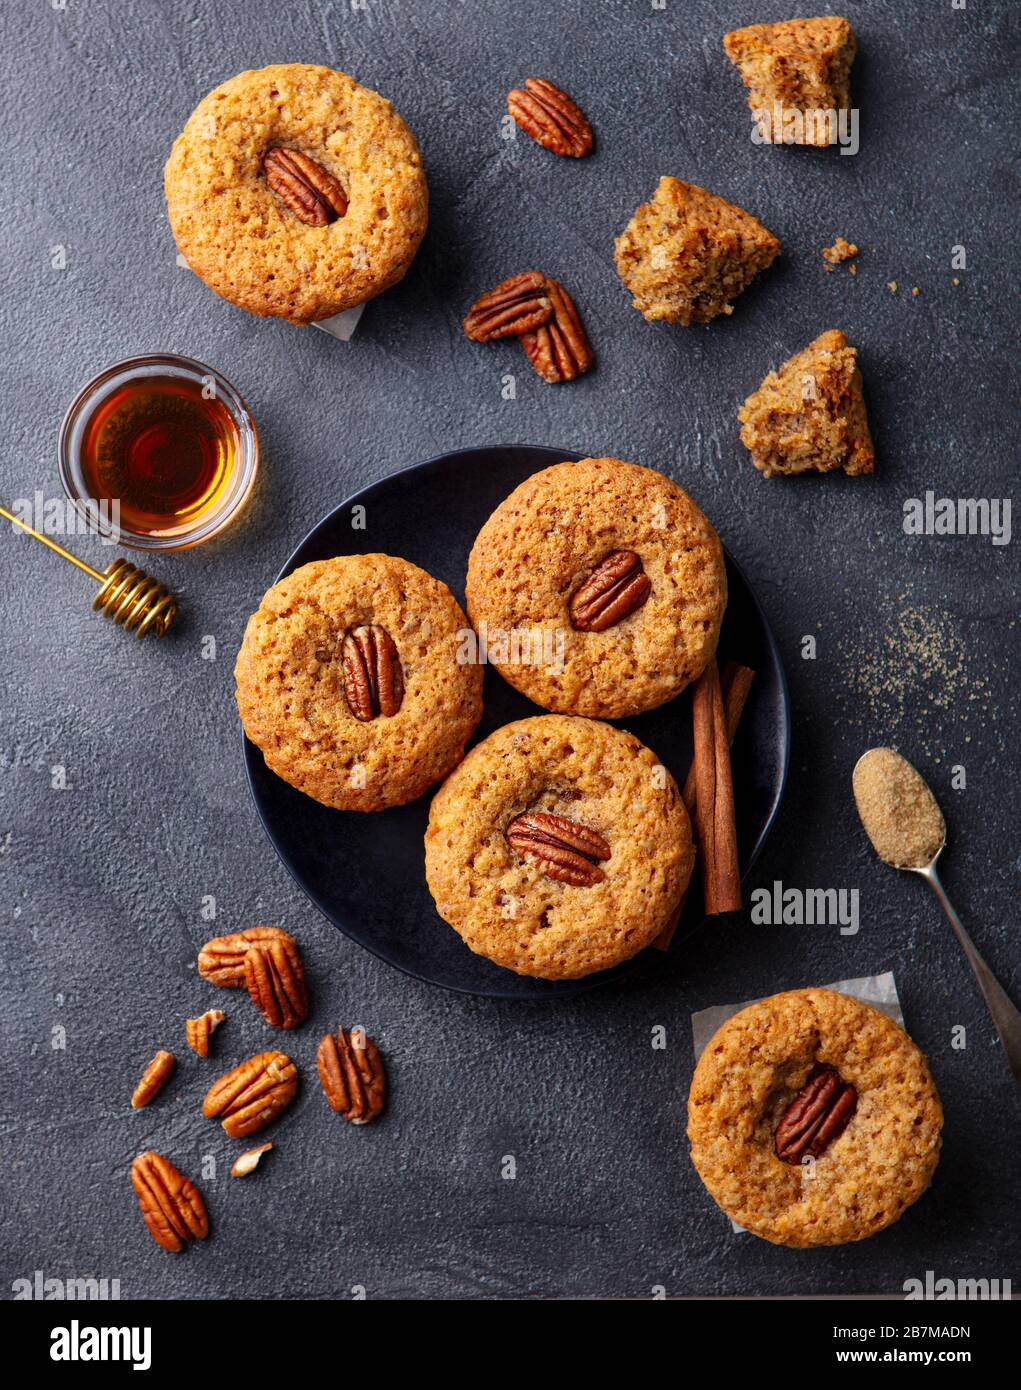 Pecan nut muffins on a plate. Grey background. Top view. Stock Photo